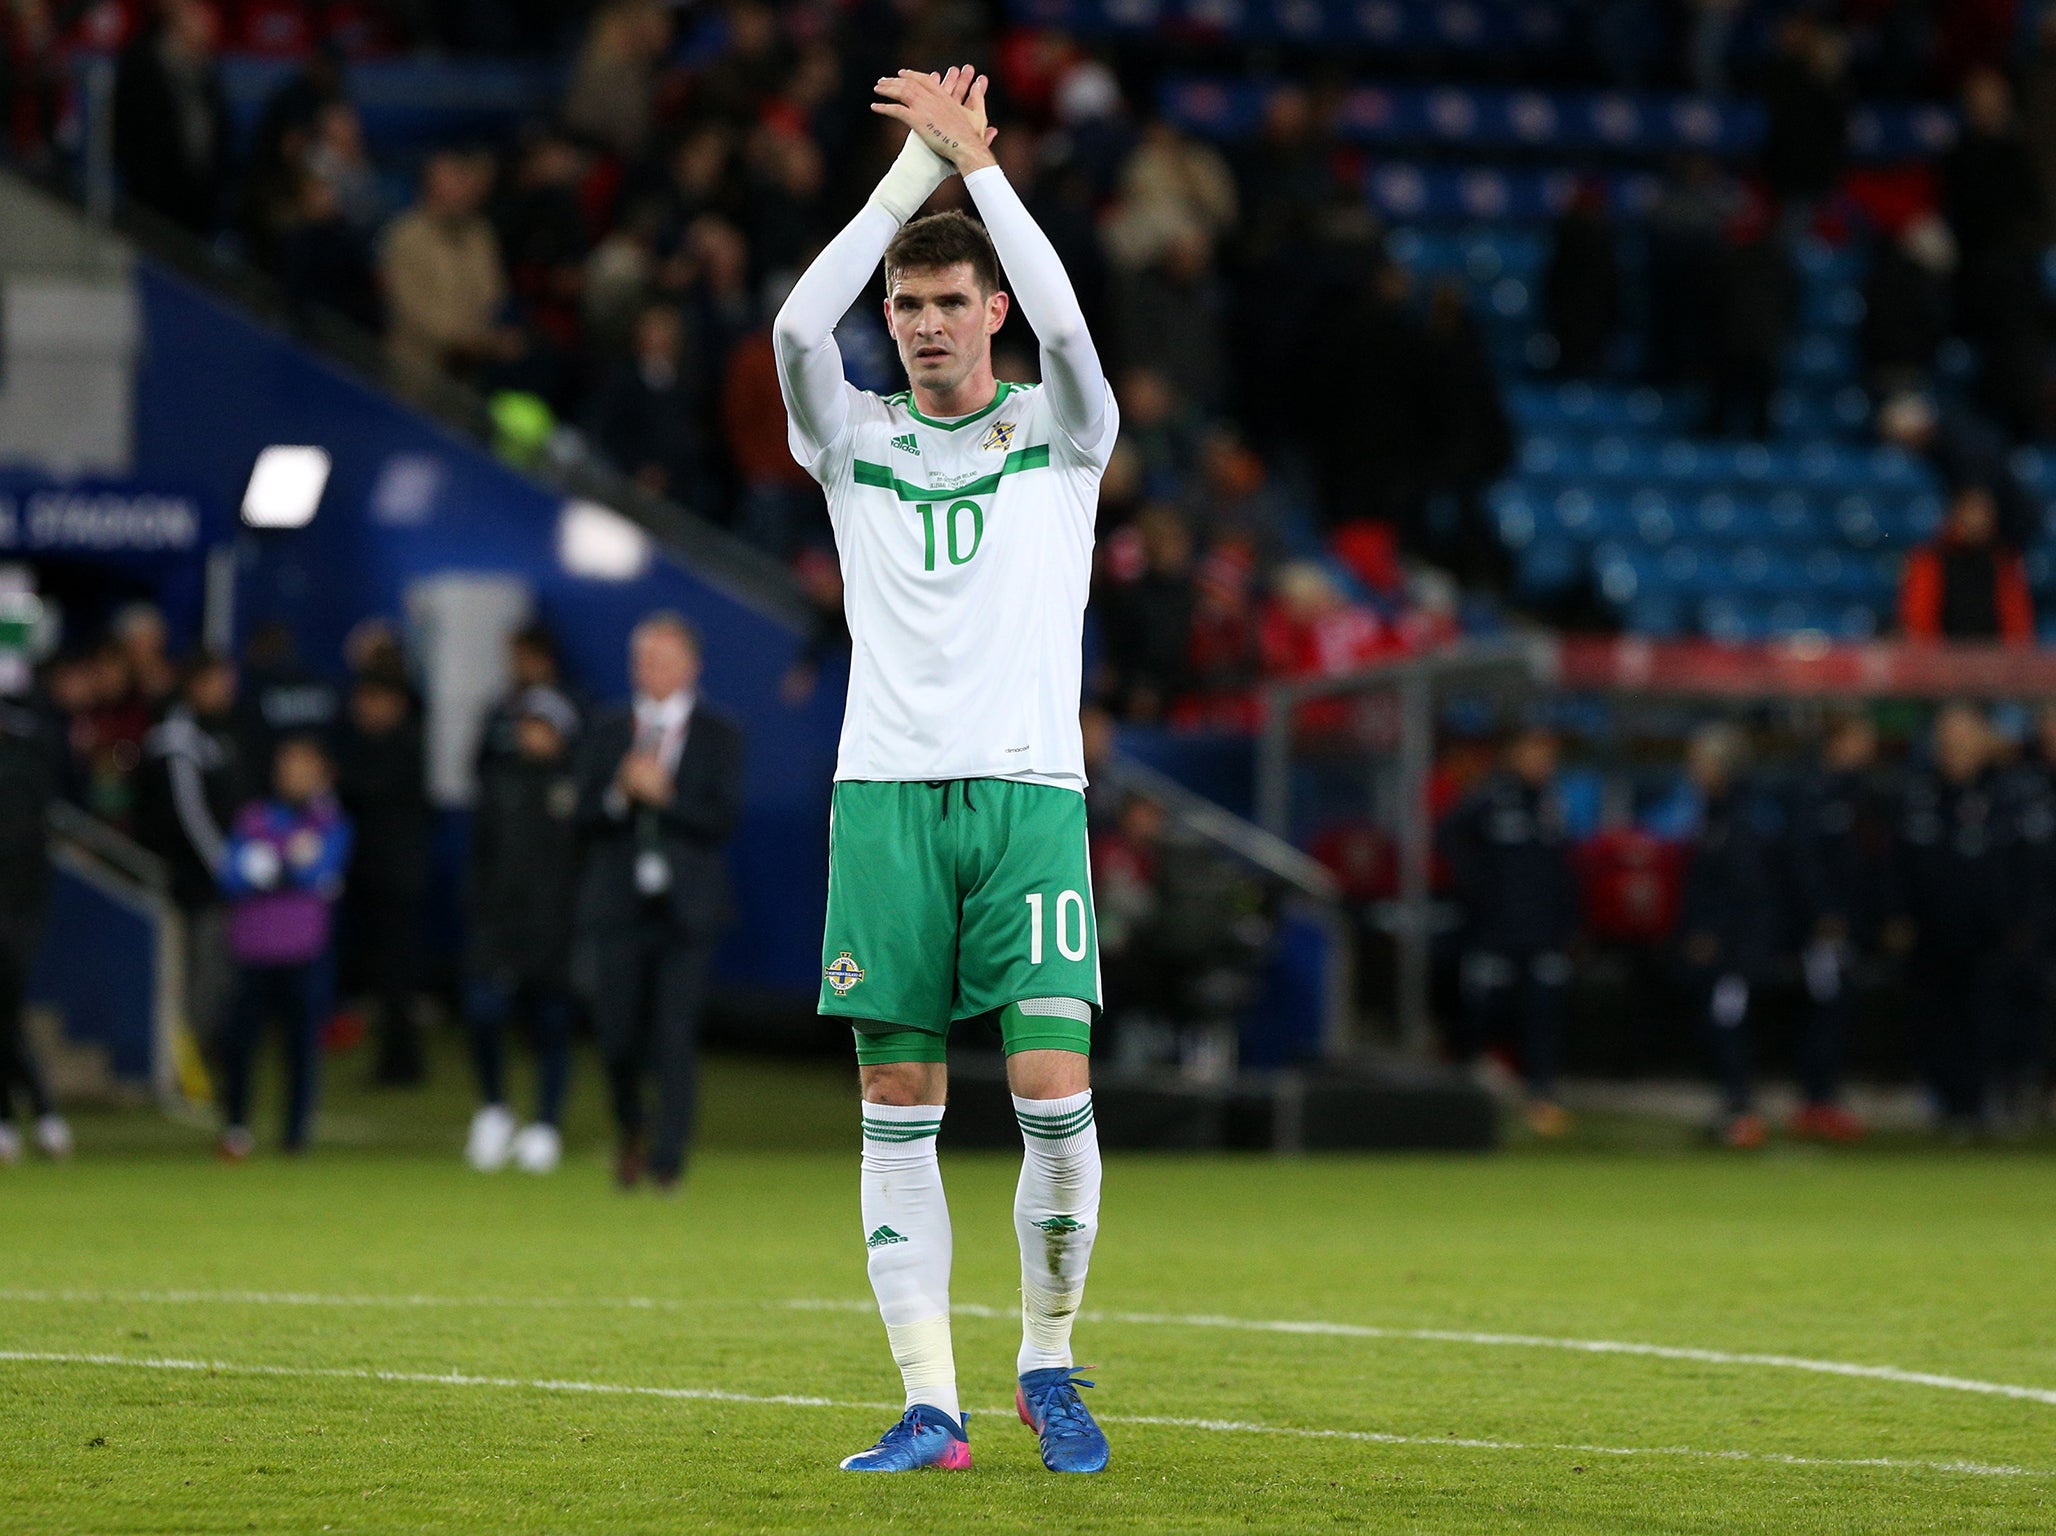 Northern Ireland lost their final qualification match, to Norway